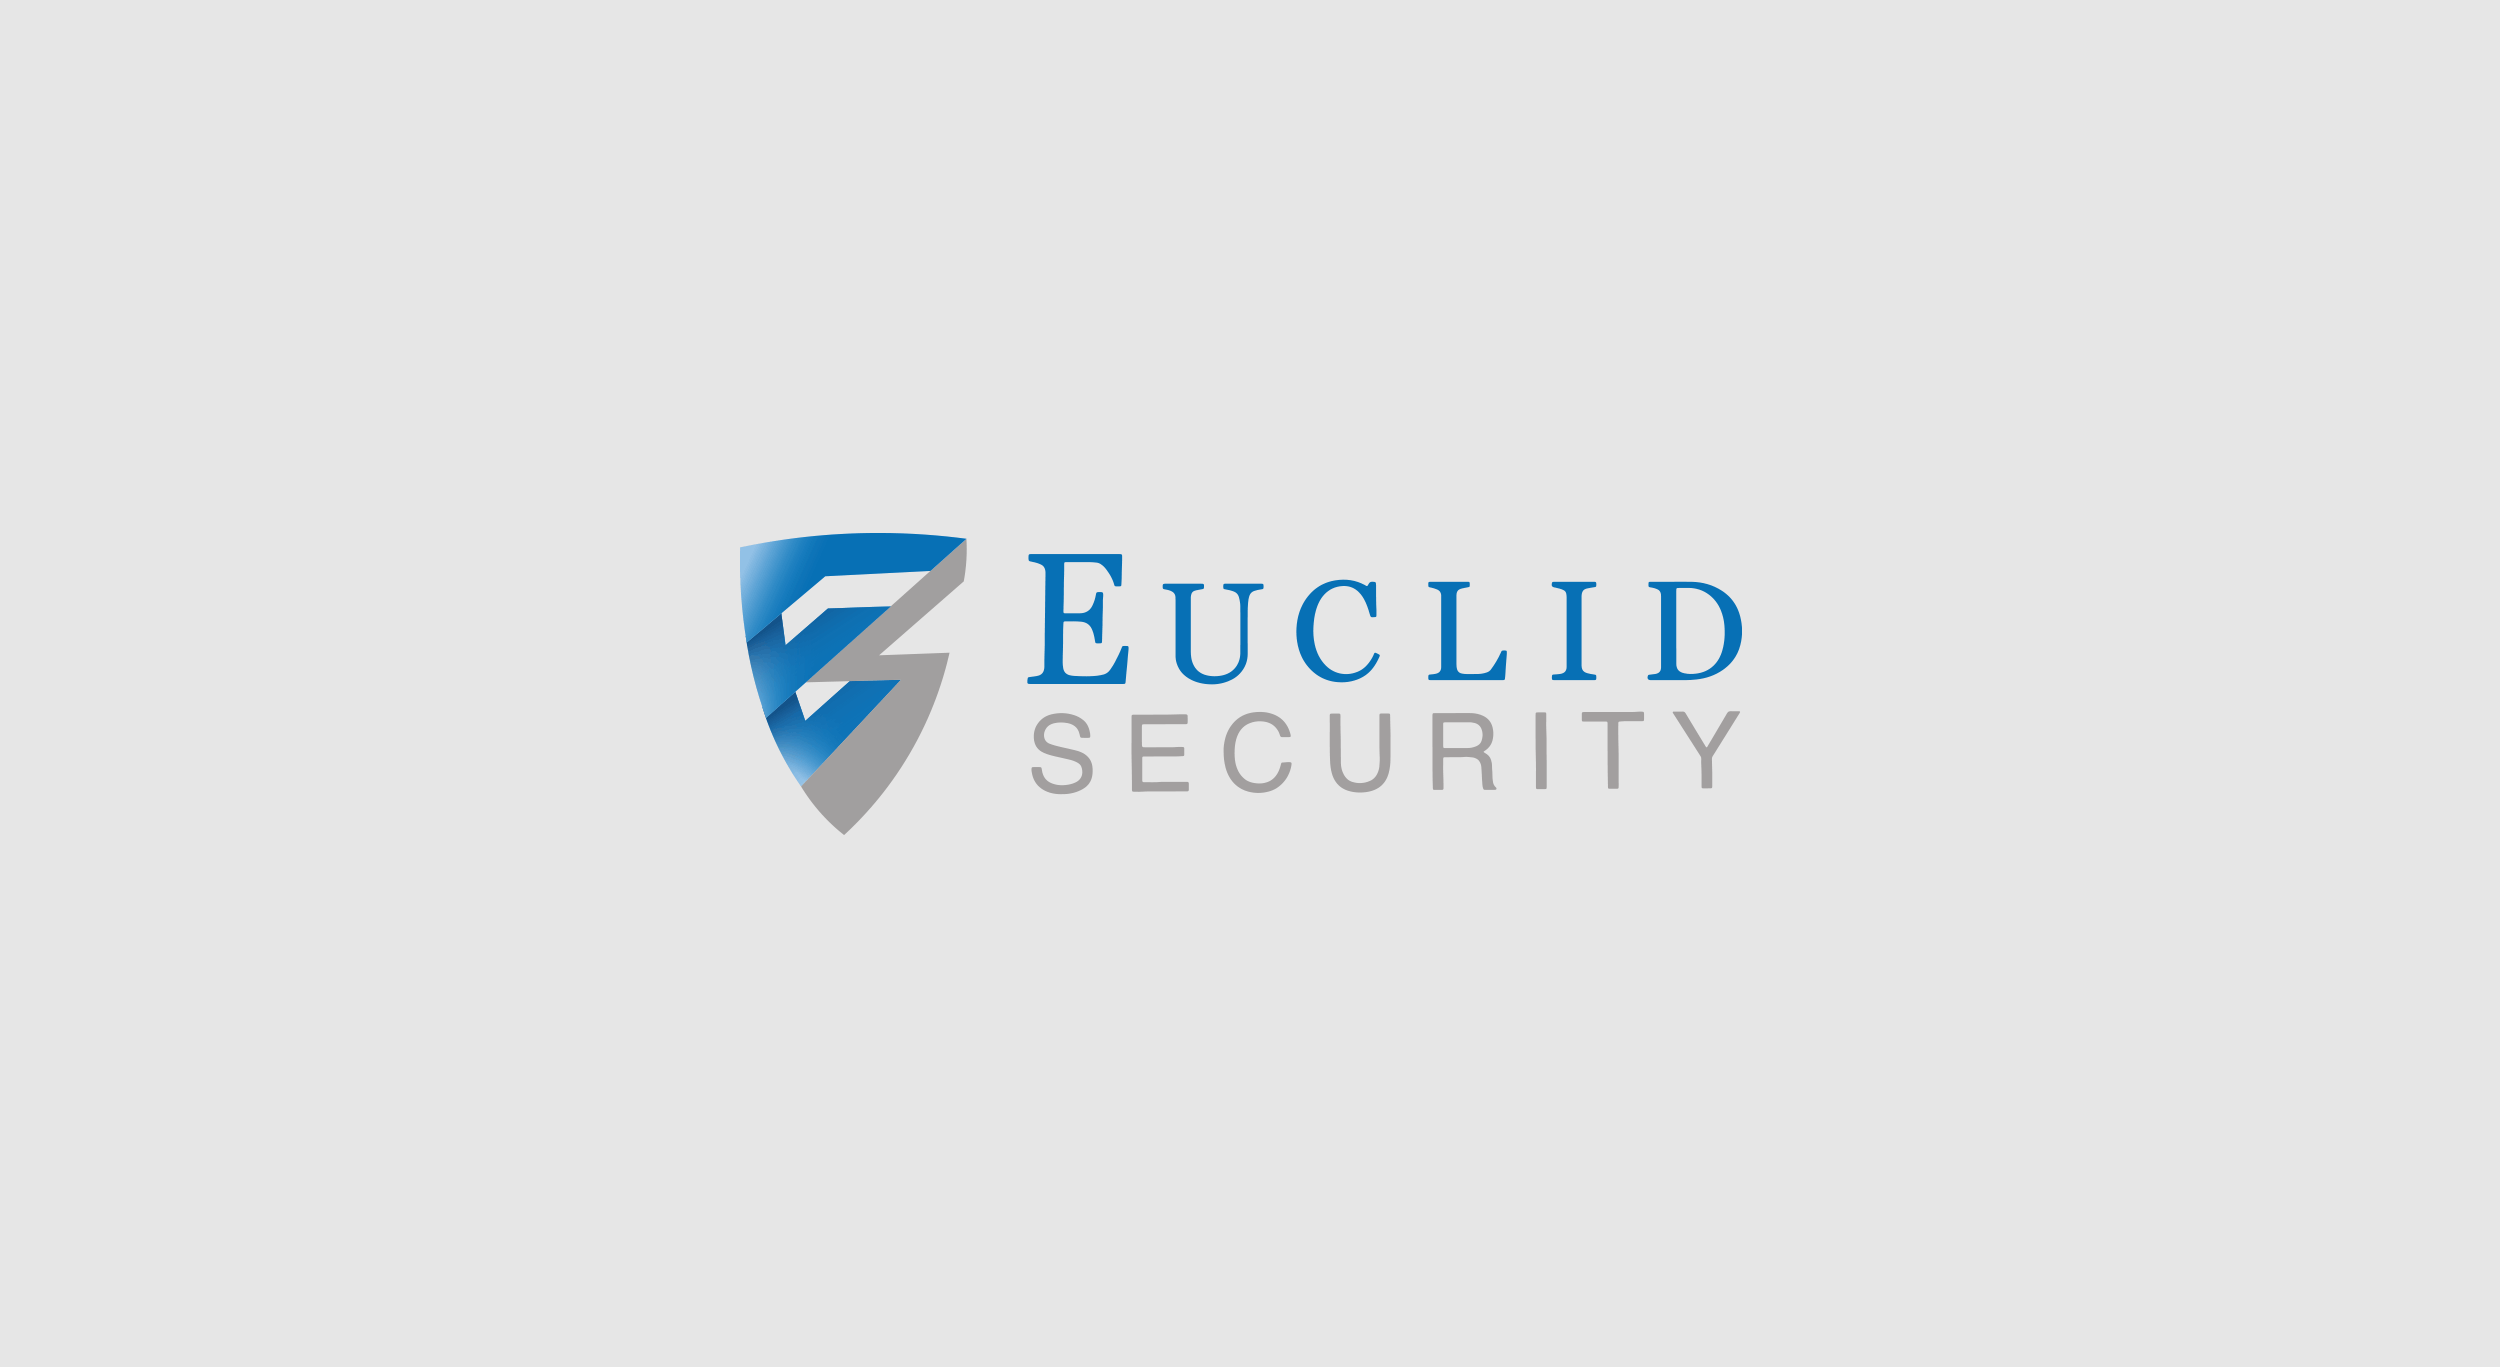 Euclid Security Insurance